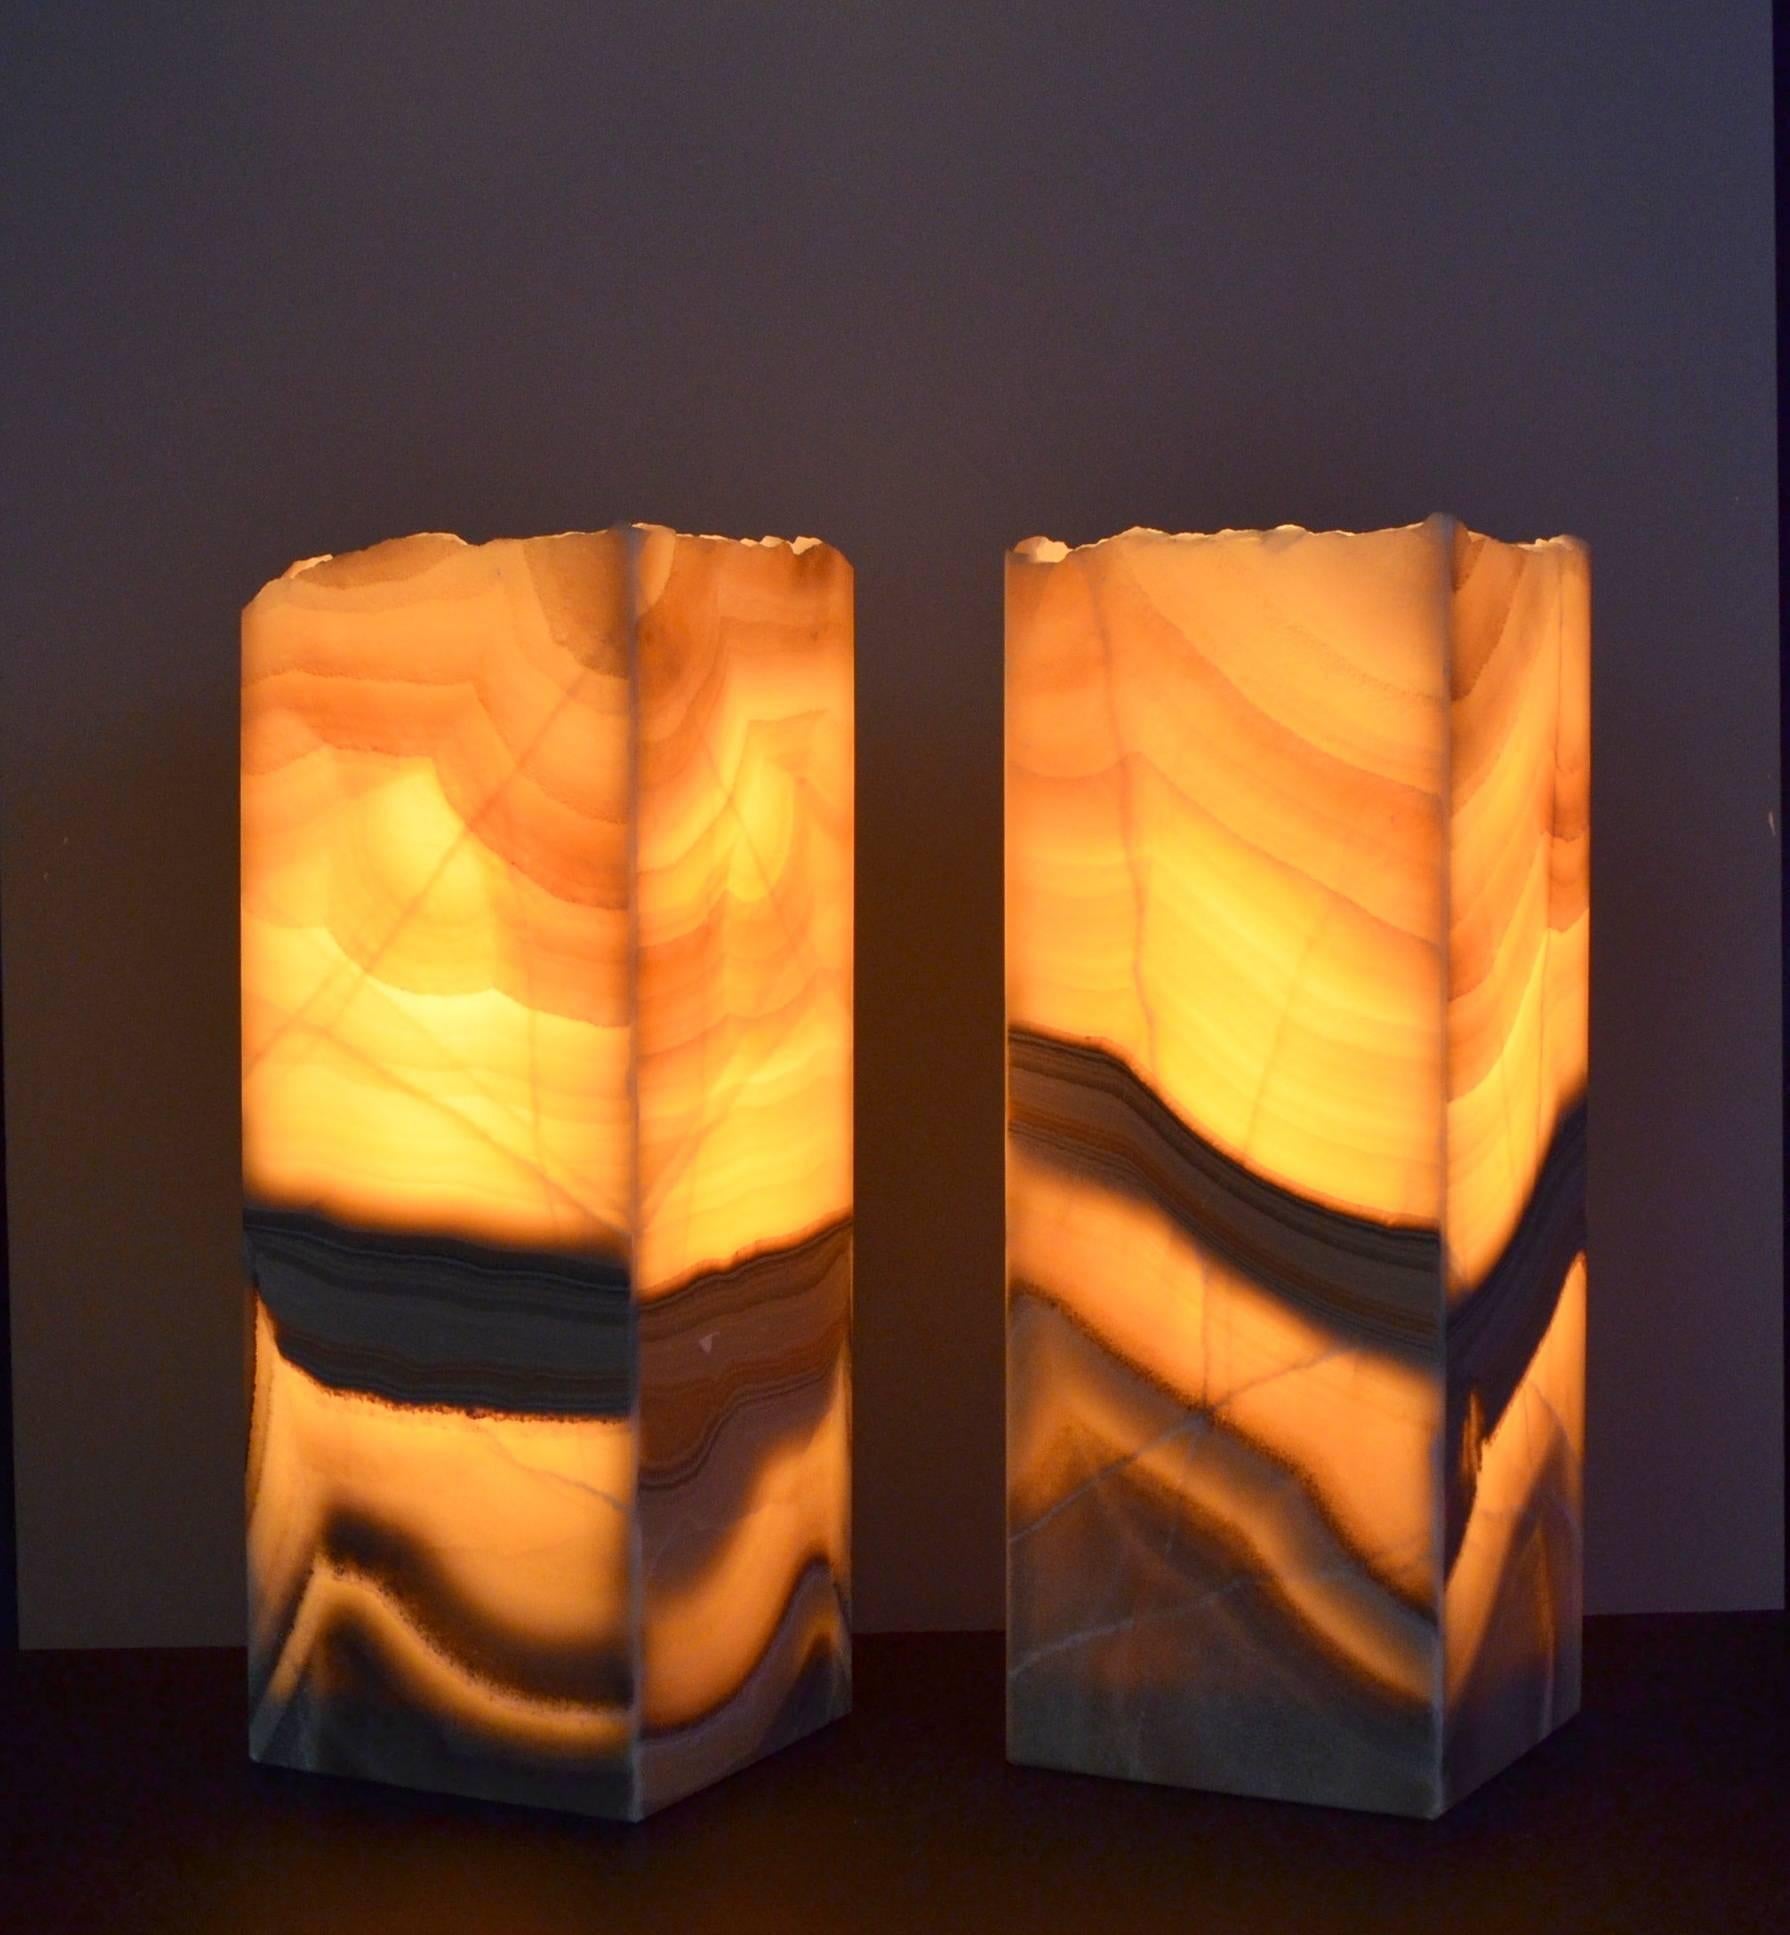 Onyx square base ambient lamps with a rough natural edge.